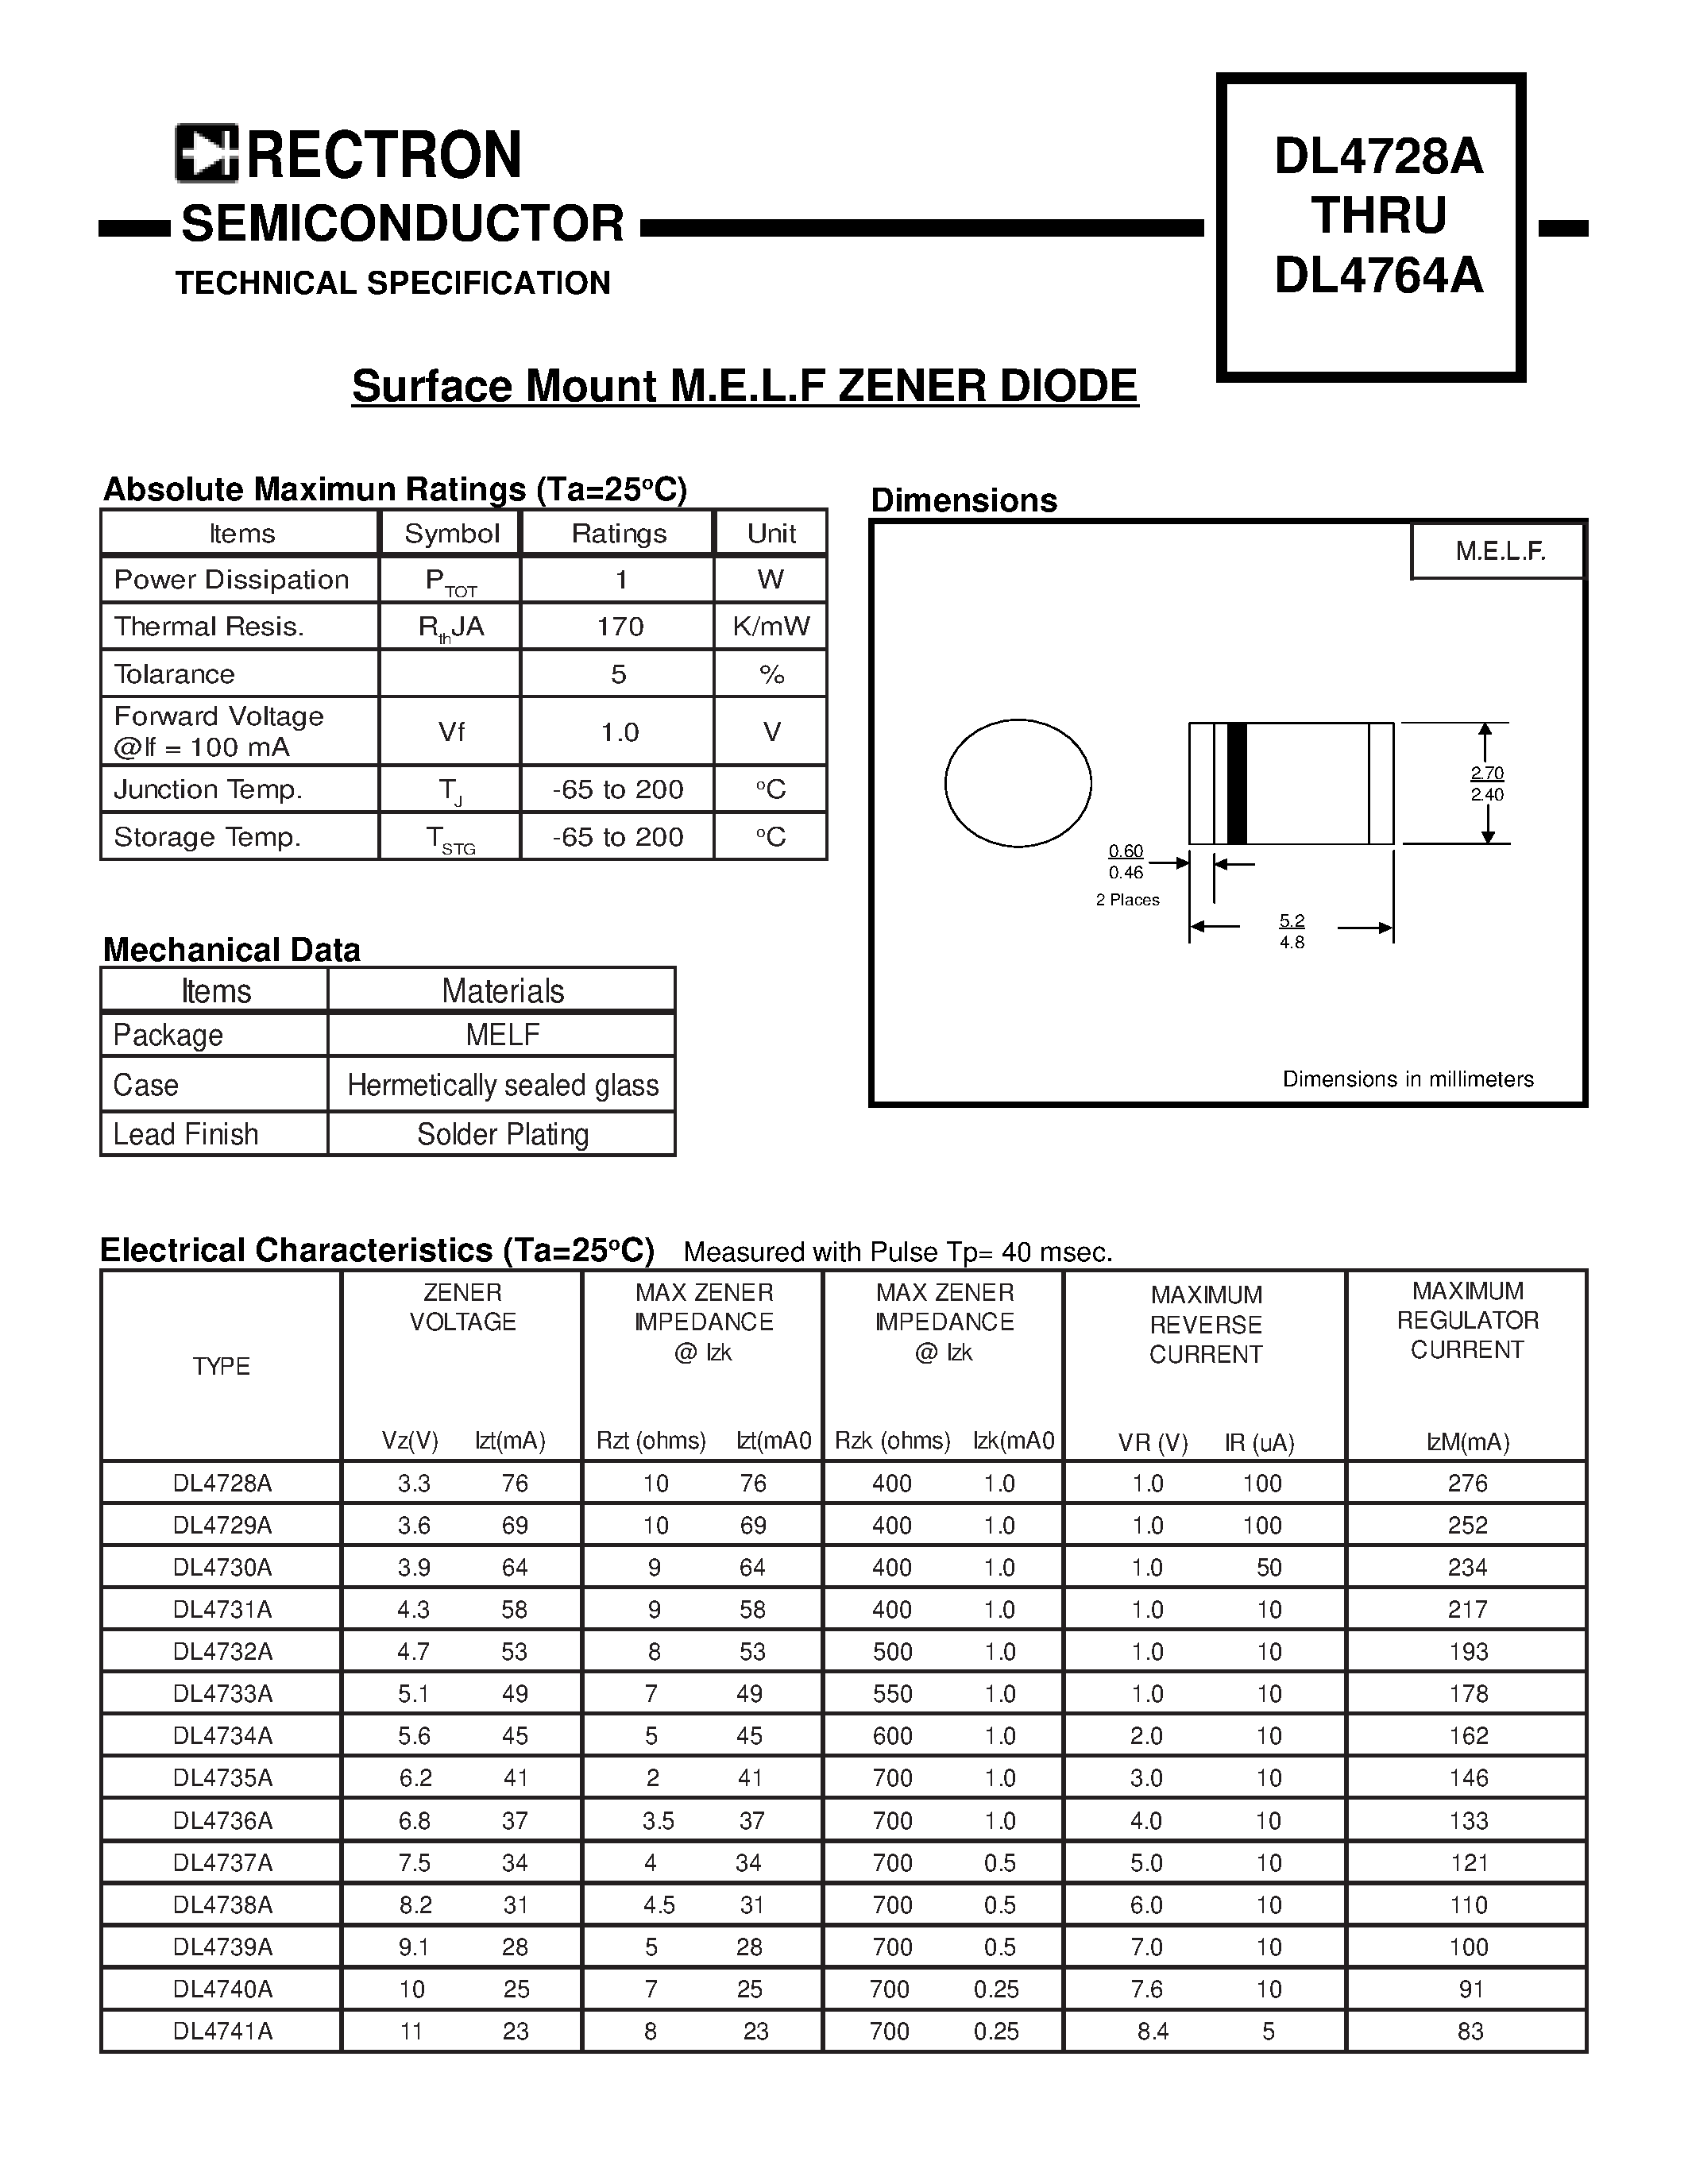 Datasheet DL4749A - Surface Mount M.E.L.F ZENER DIODE page 1